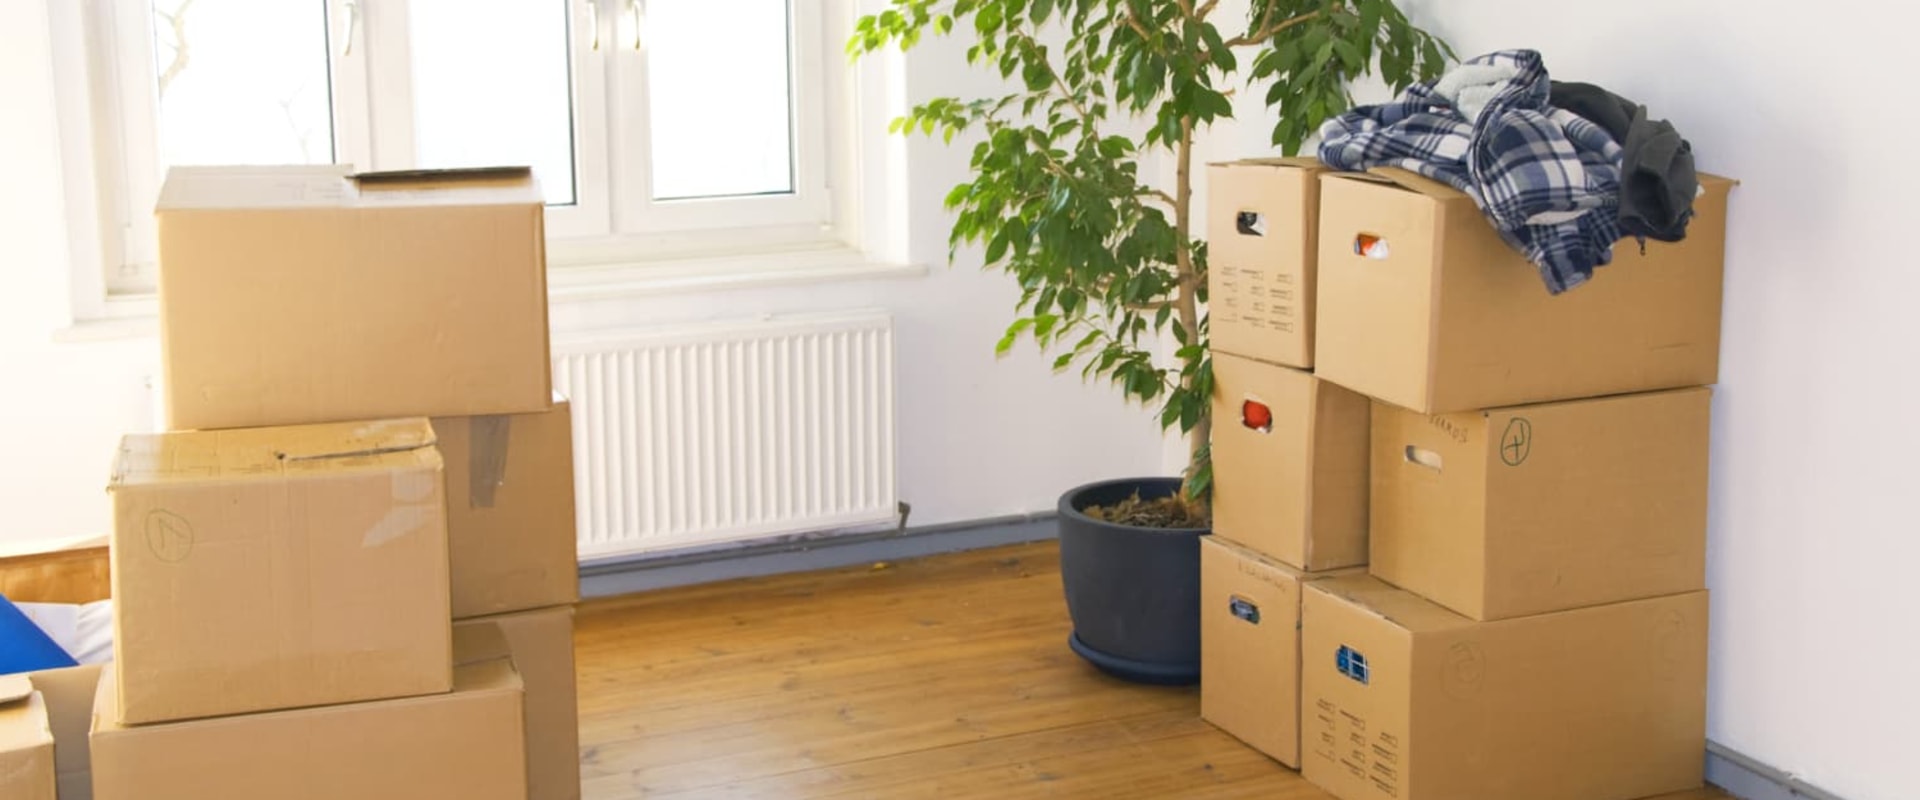 How can i save money on packing materials for a house move?